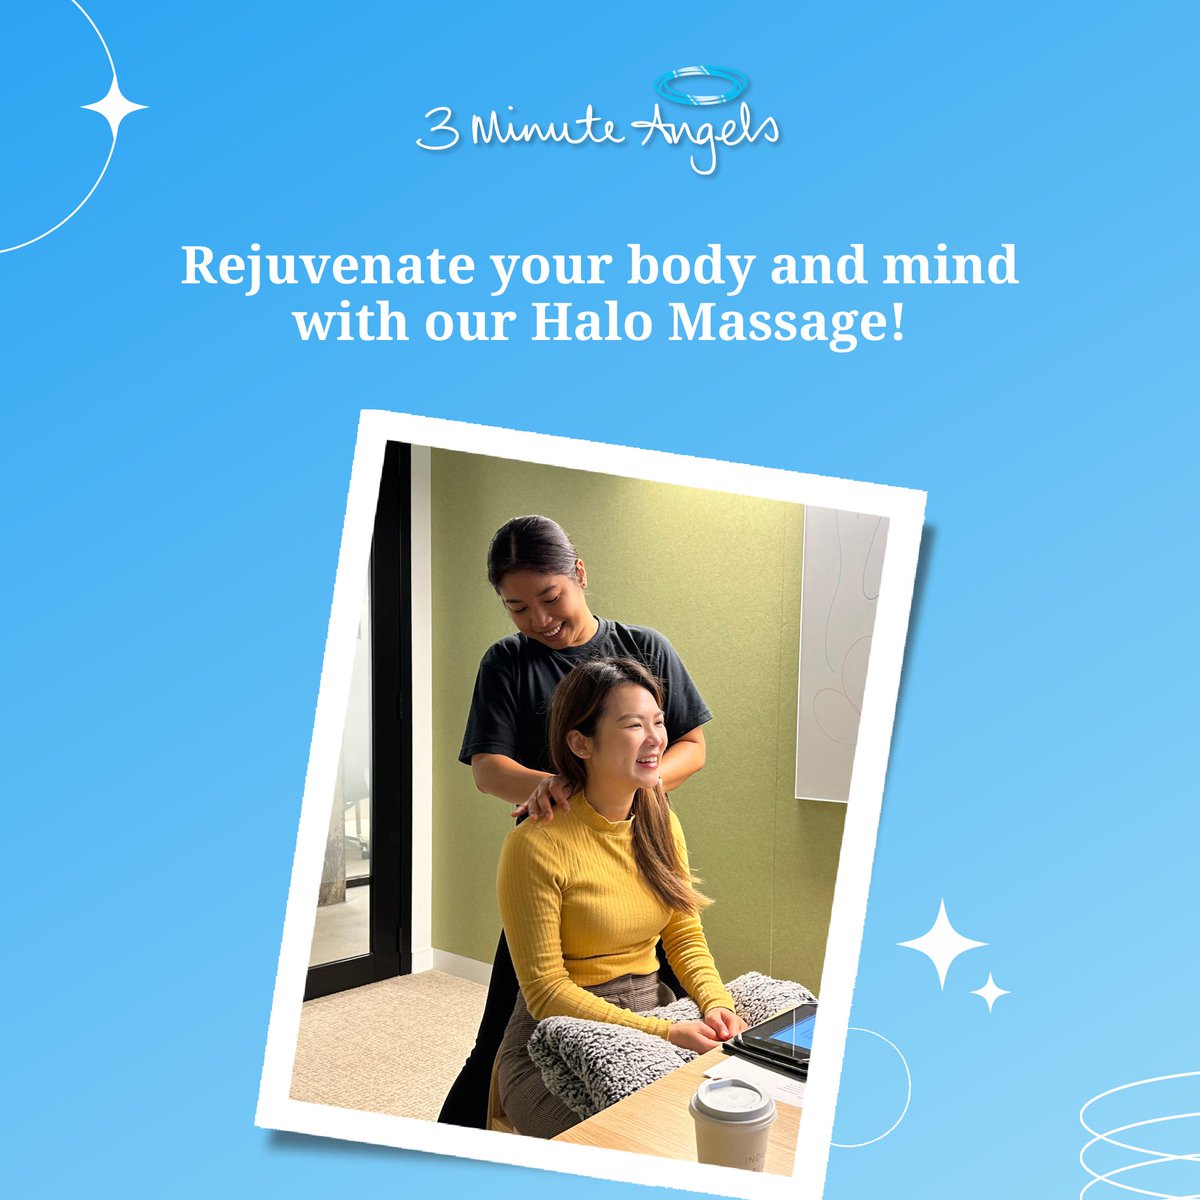 A visit from our Angels can help rejuinate your body and mind. 😇

Schedule one now at bit.ly/3maservAU or call us on 1300 662 022.

#friday #friyay #feelgood #massagesatwork #workmassage #corporatelife #rejuvenateyourbody #rejuvenateyourmind #3MinuteAngels #HaloMassage